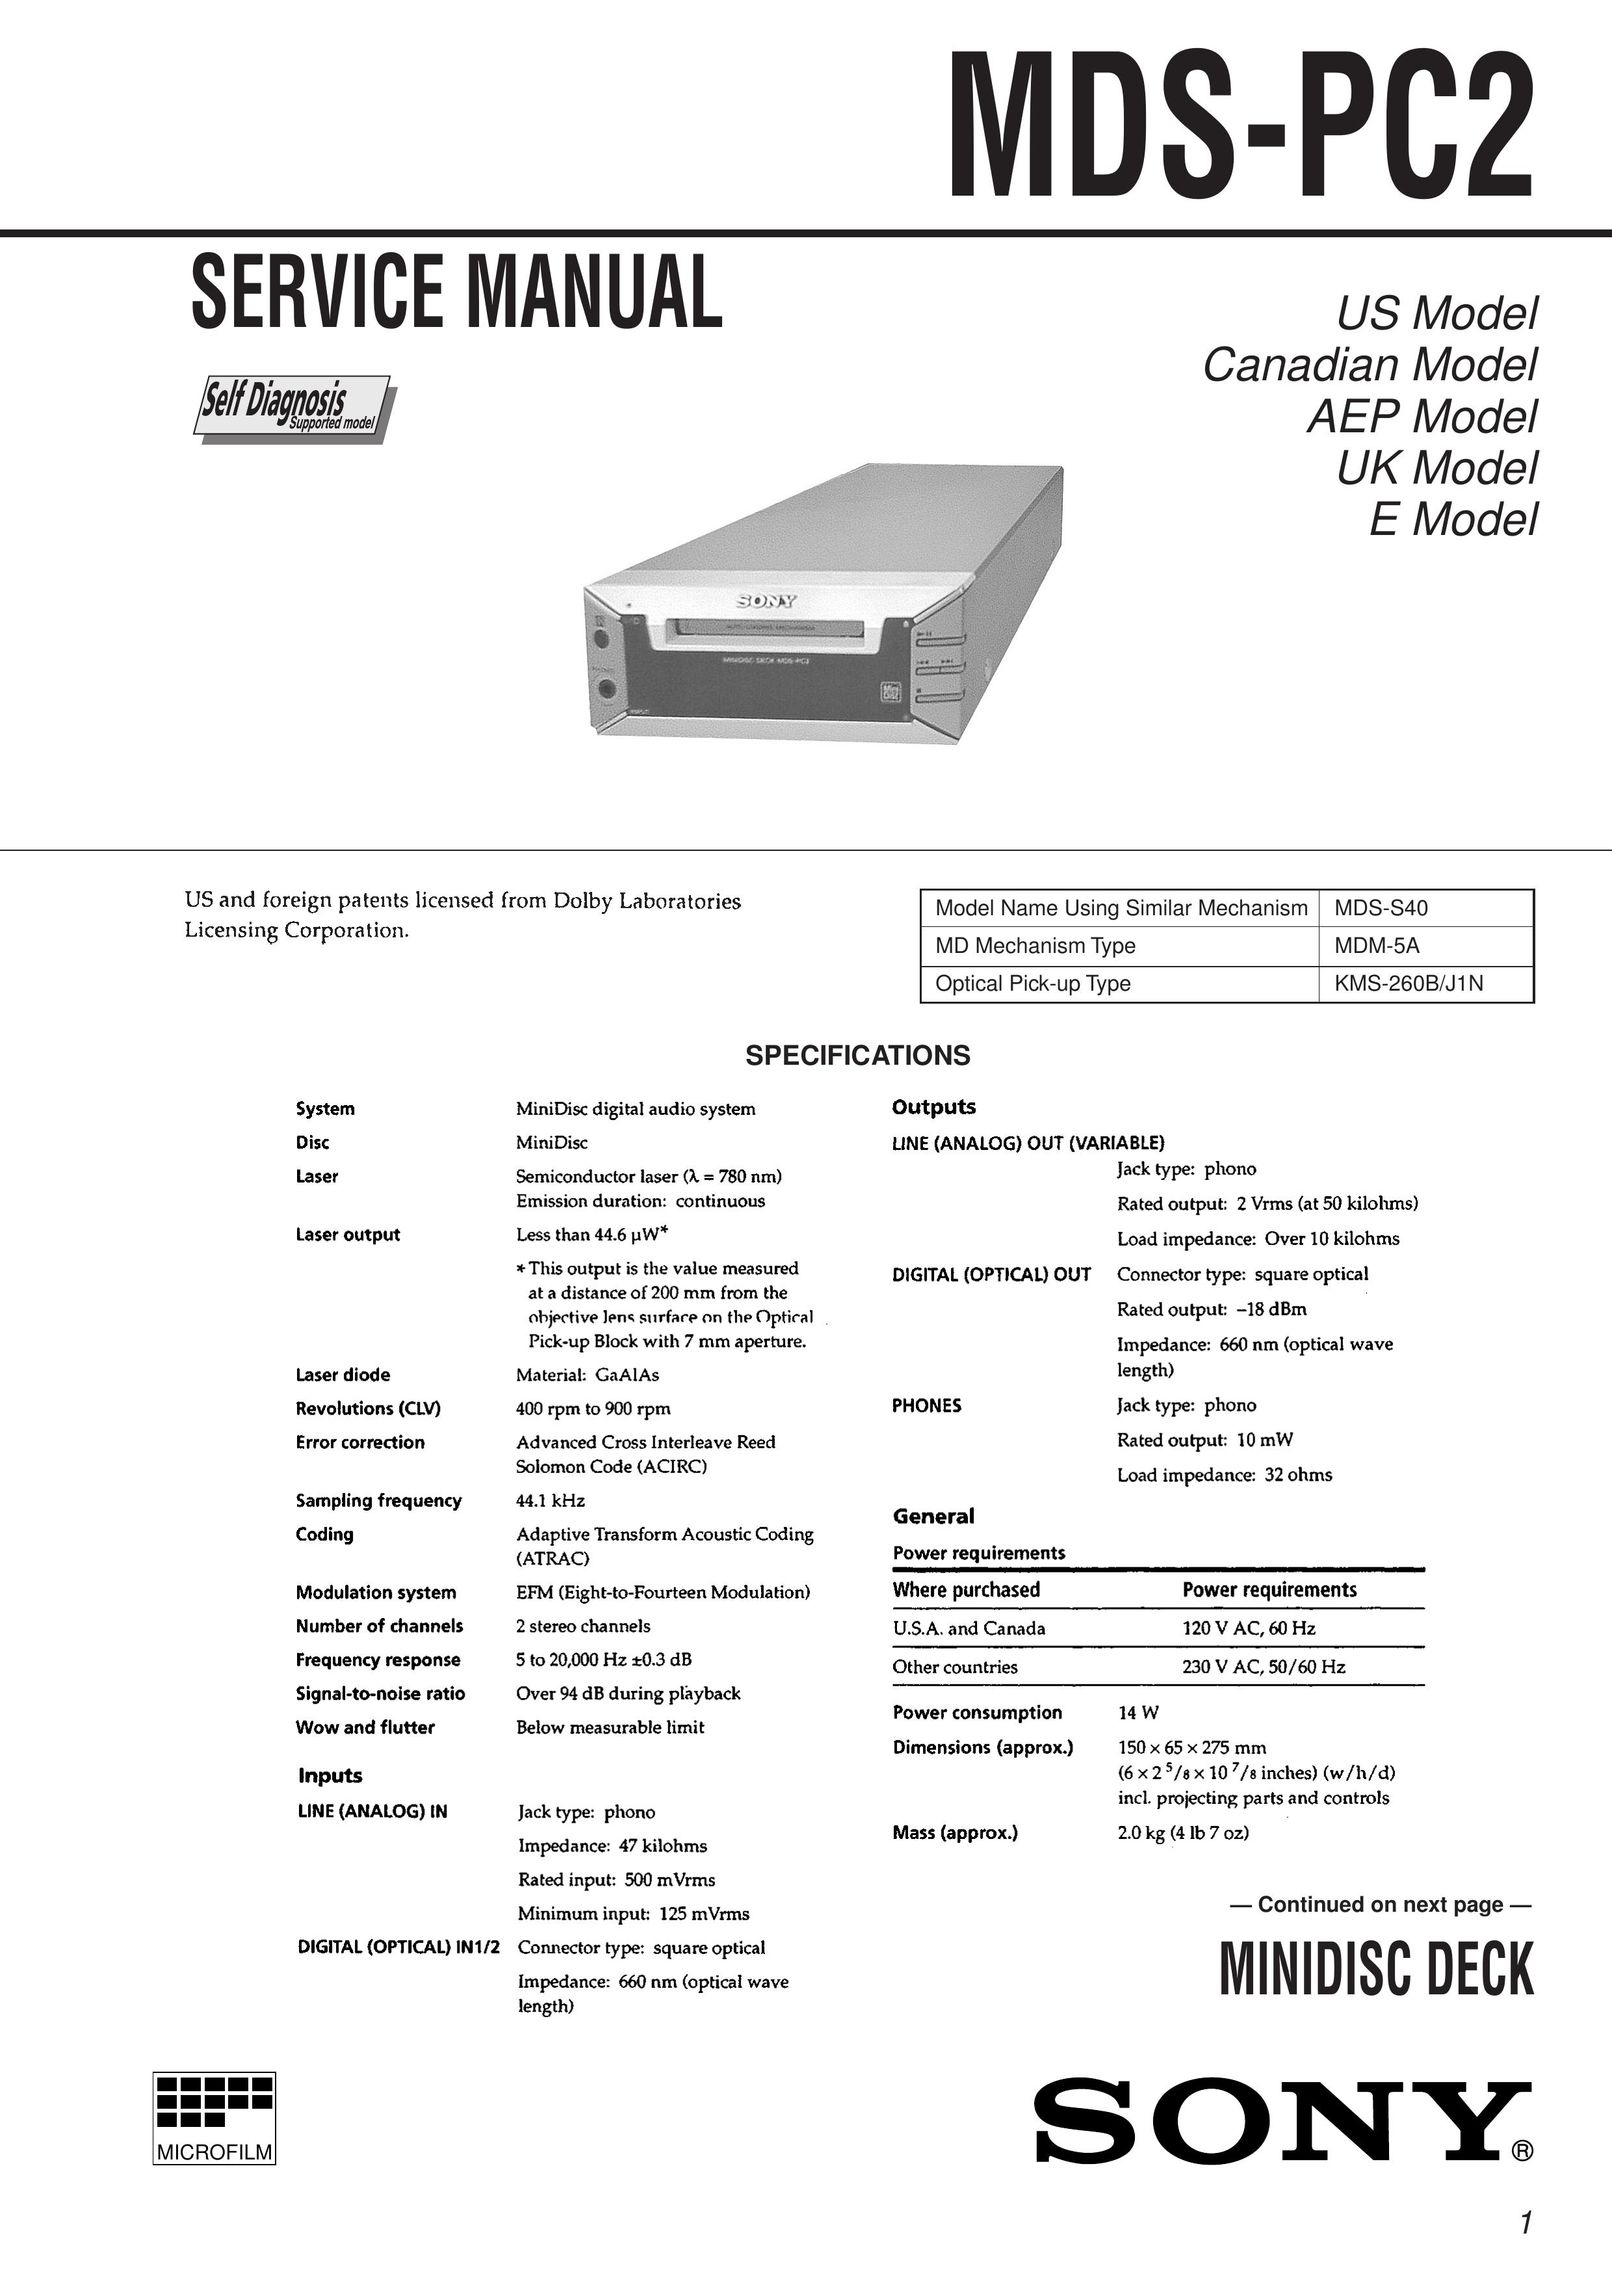 Sony MDS-PC2 MiniDisc Player User Manual